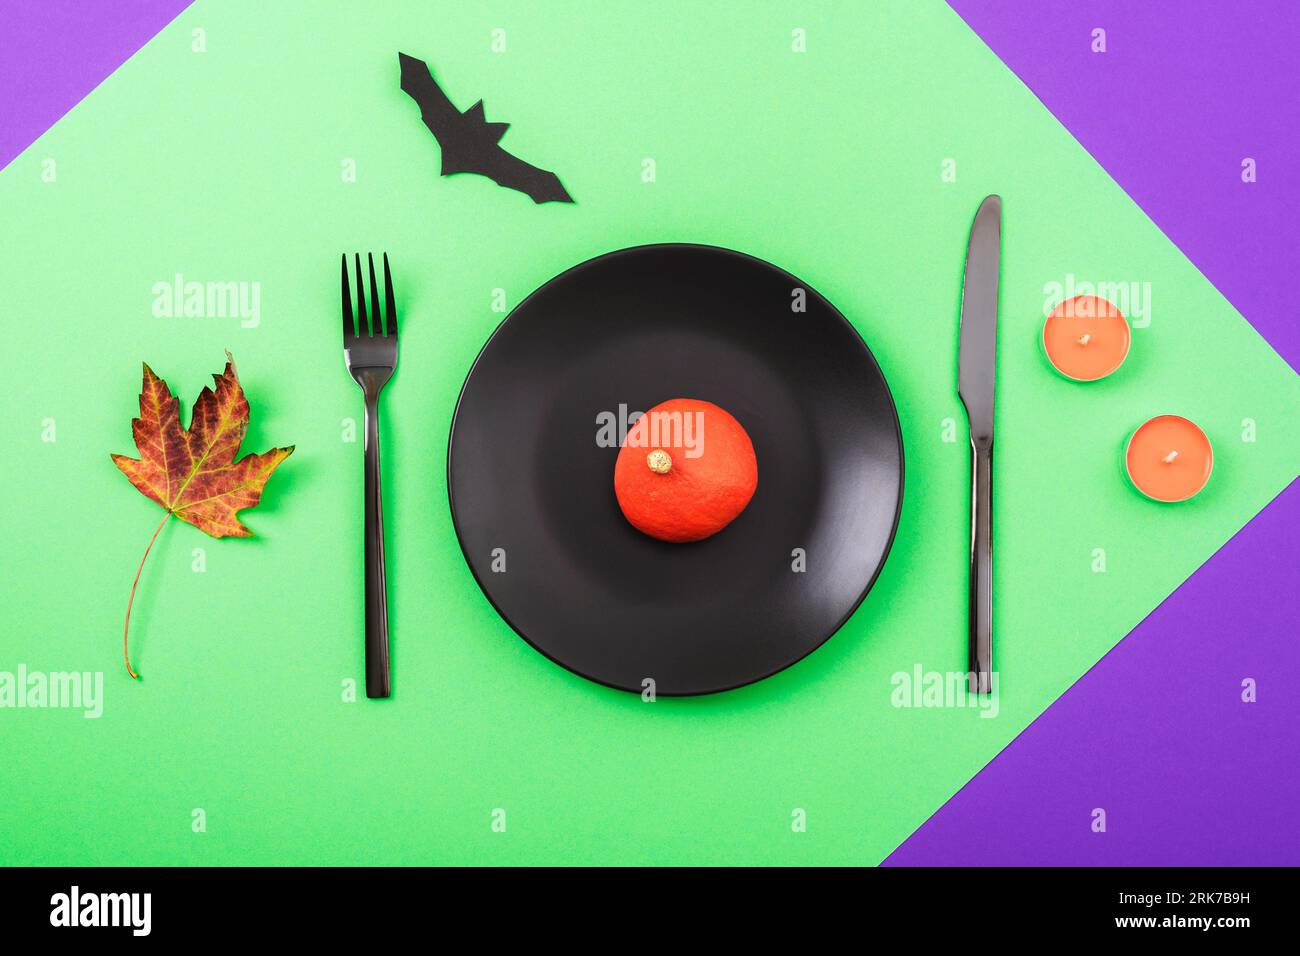 Halloween green and purple table place setting with decorative pumpkin, bat, autumn leaf and orange candles. Top view, flat lay. Stock Photo